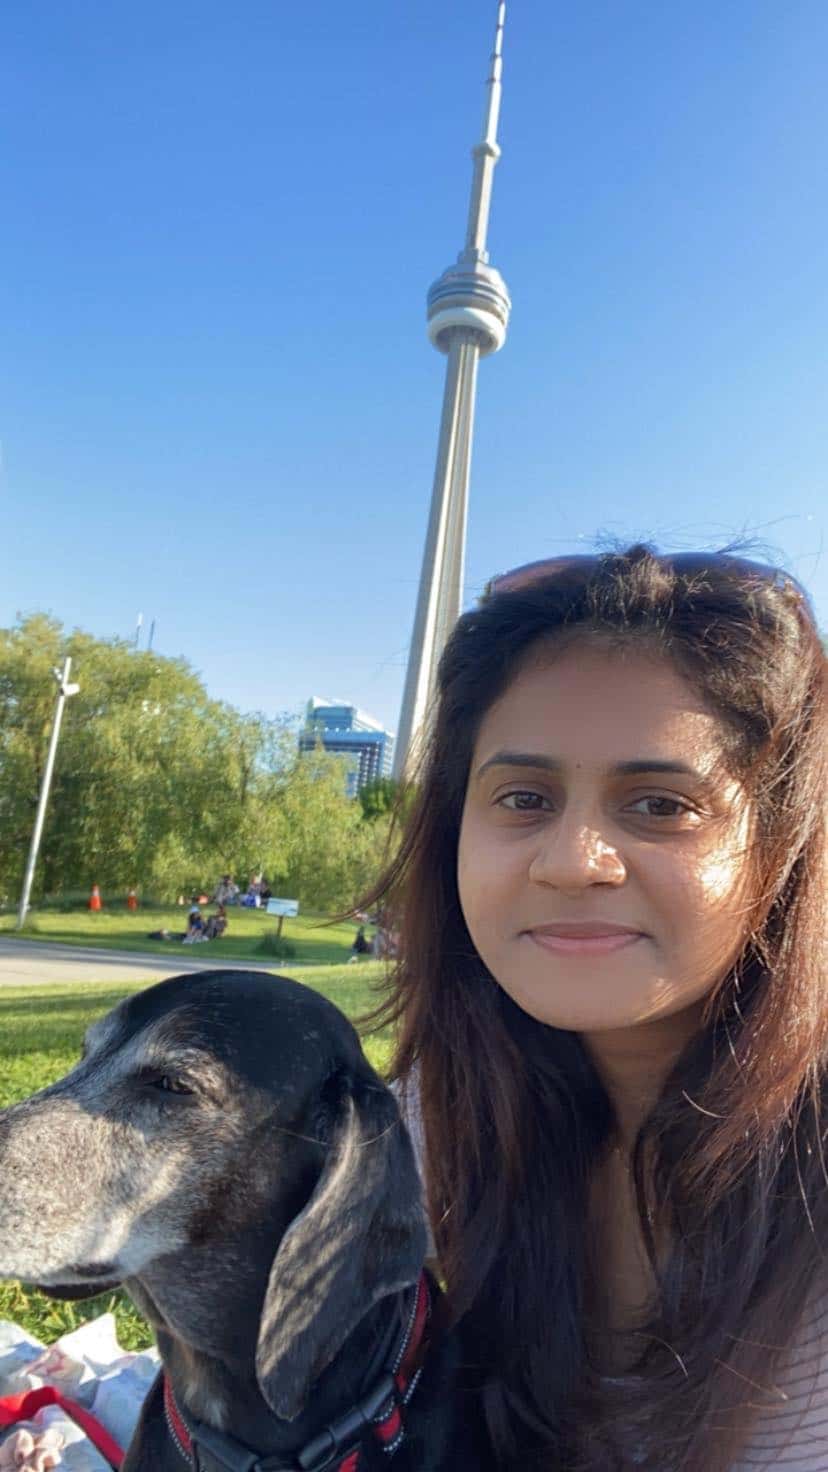 Selfie of permanent resident Marushka Loshki Nair with CN tower in the background